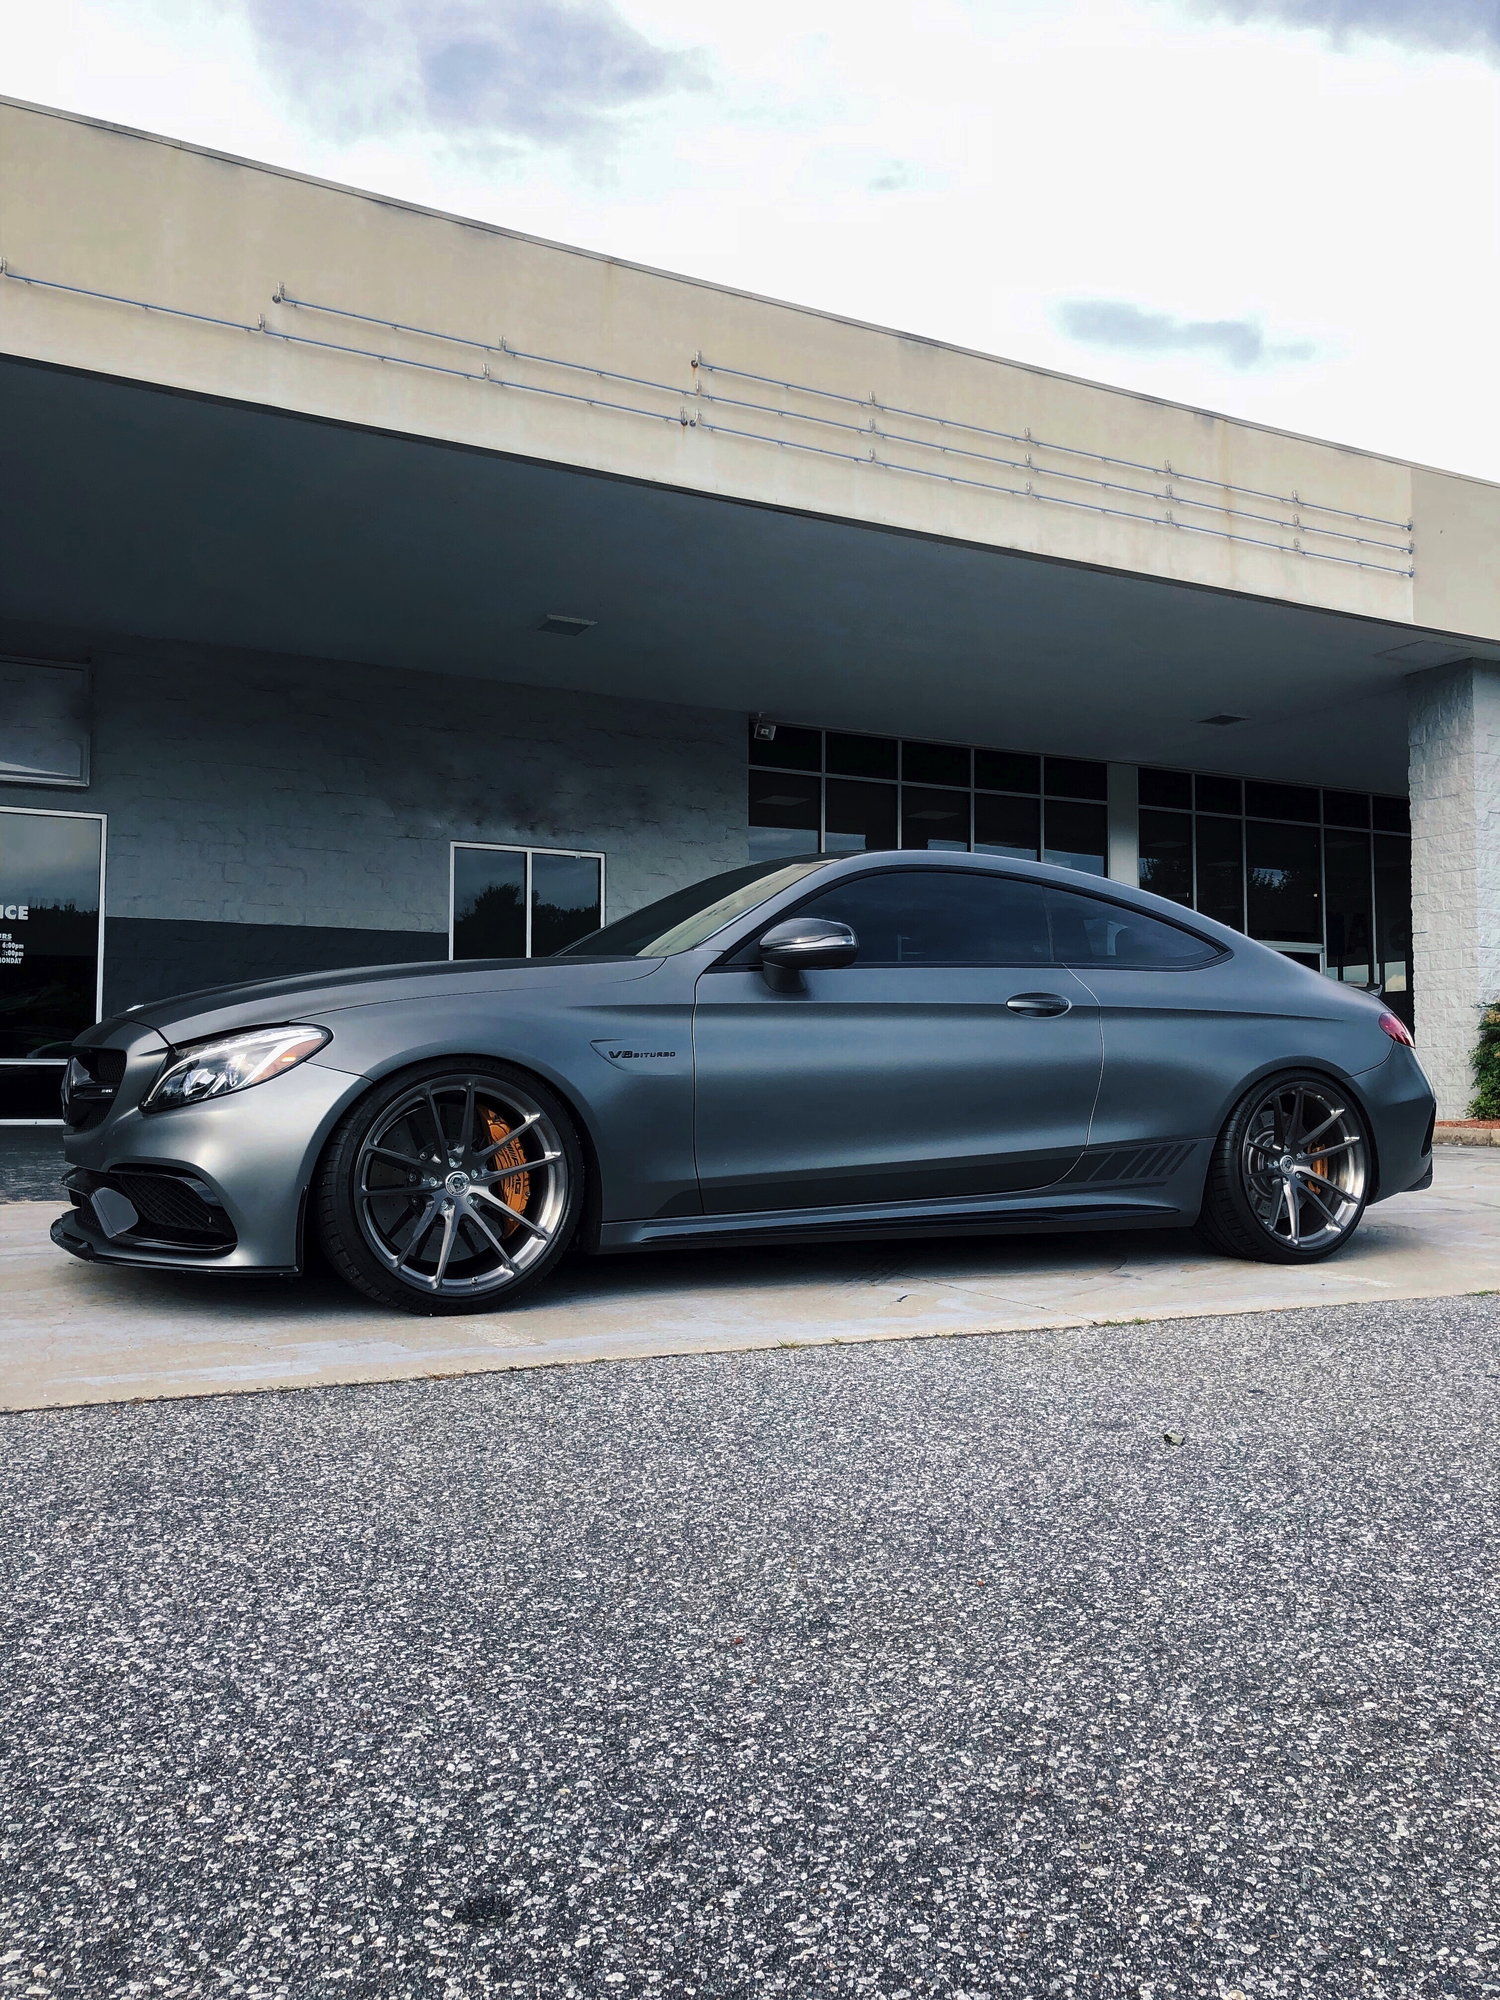 Wheels and Tires/Axles - HRE P104's in brushed dark clear - 20" perfect AMG C63 coupe fitment - Used - 2017 to 2019 Mercedes-Benz C63 AMG S - Hickory, NC 28602, United States